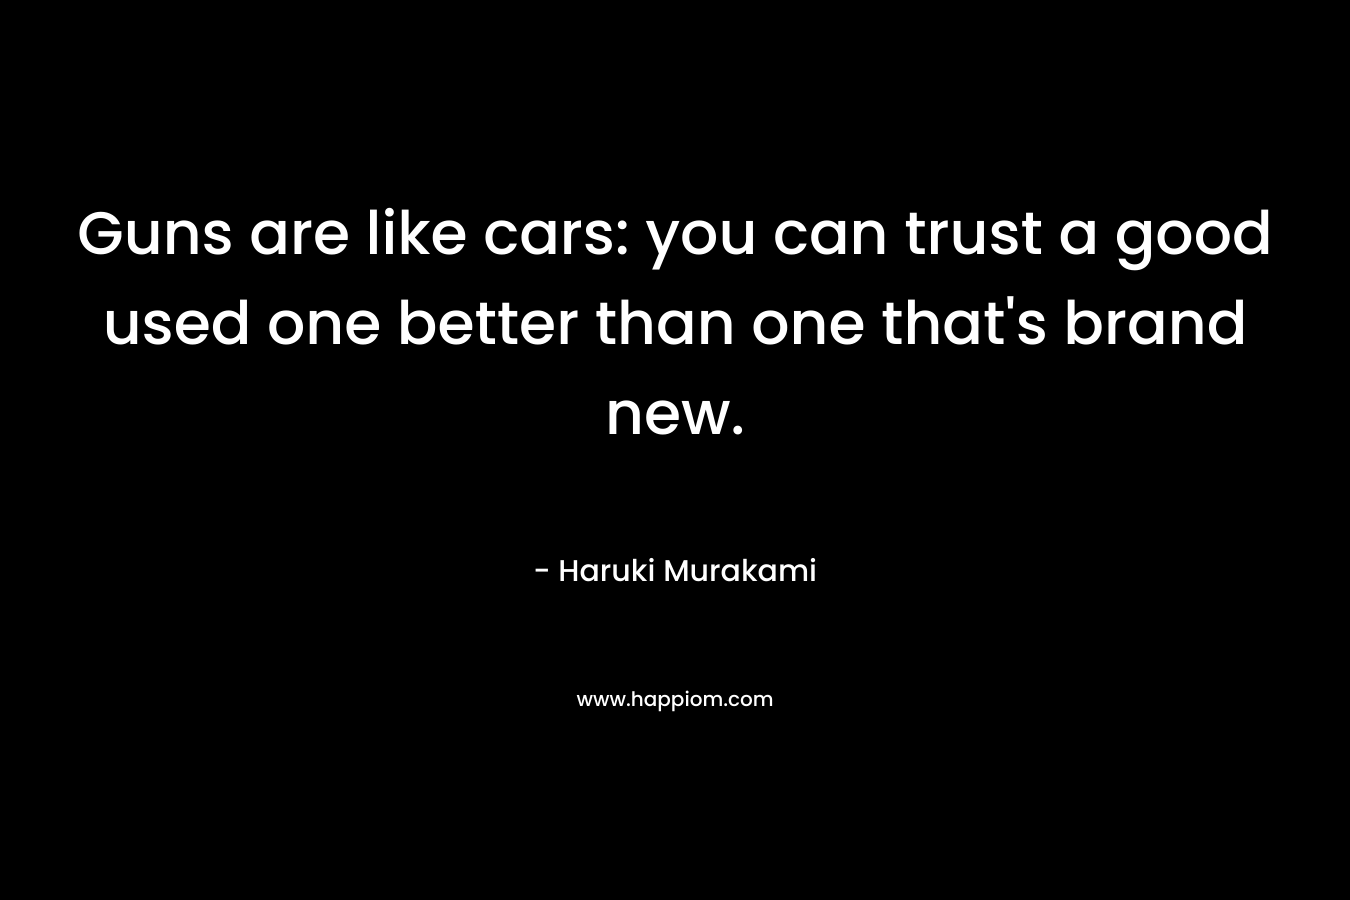 Guns are like cars: you can trust a good used one better than one that’s brand new. – Haruki Murakami